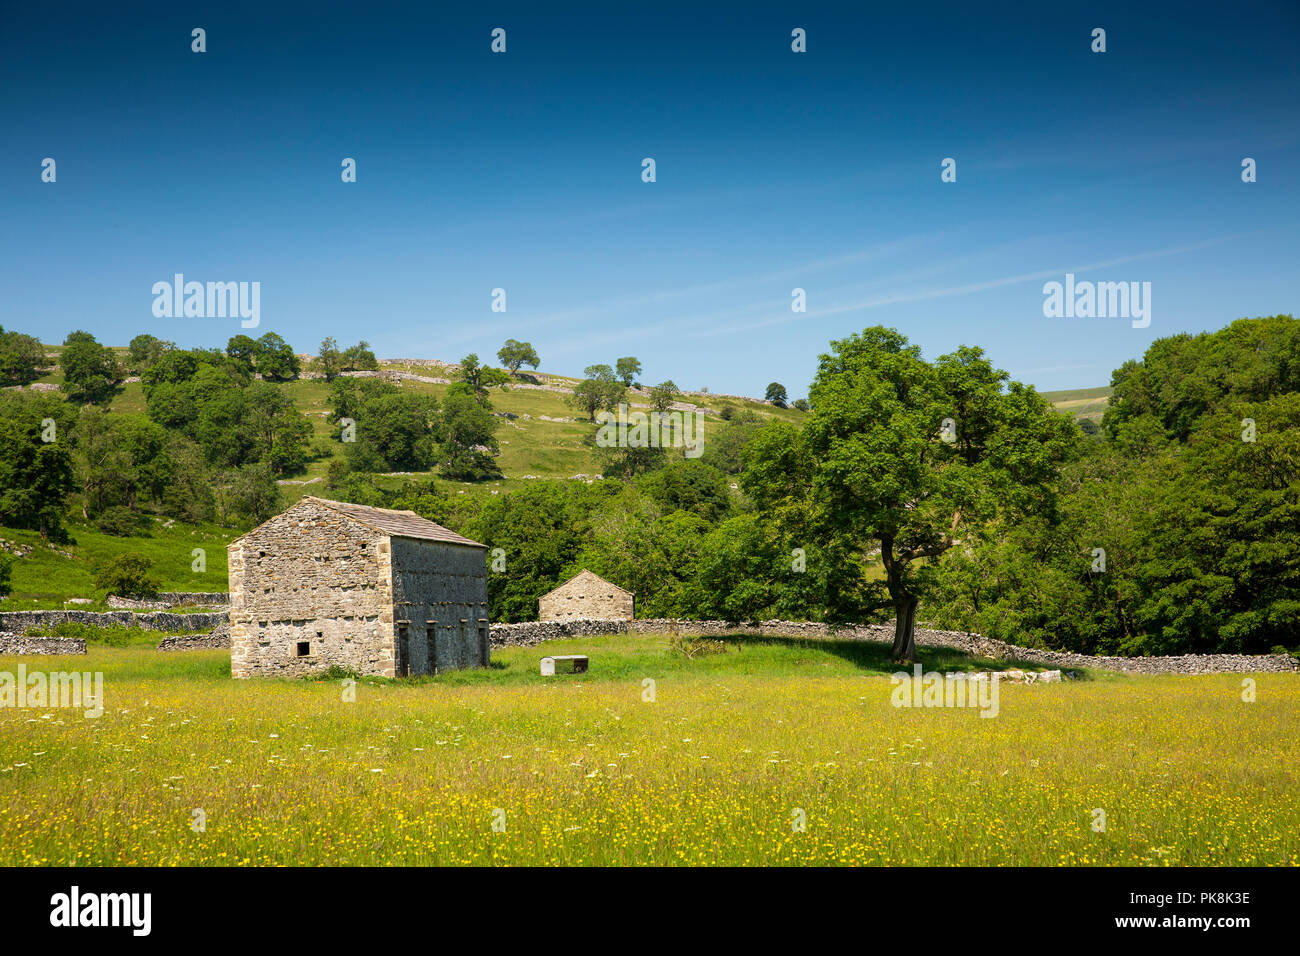 UK, Yorkshire, Wharfedale, Hubberholme, agriculture, traditional stone field barn in hay meadow Stock Photo